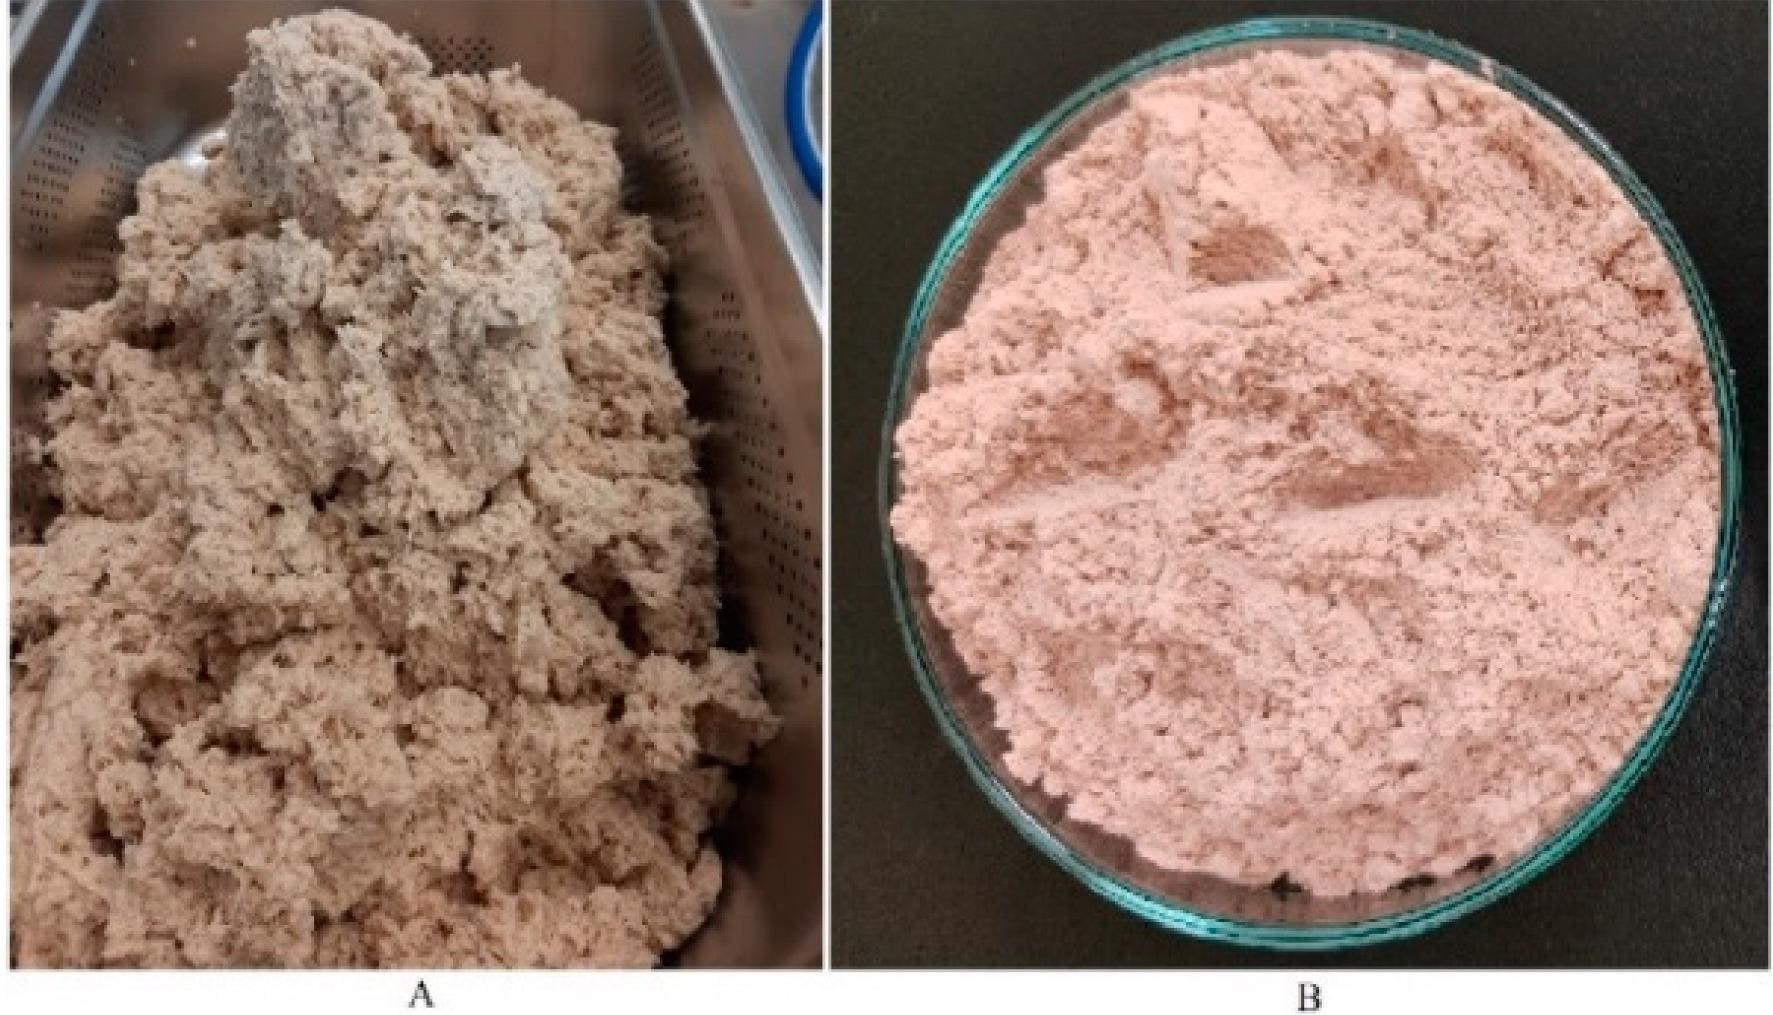 Fungal biomass (FB) (A) after washing/dewatering and (B) after drying/grinding.